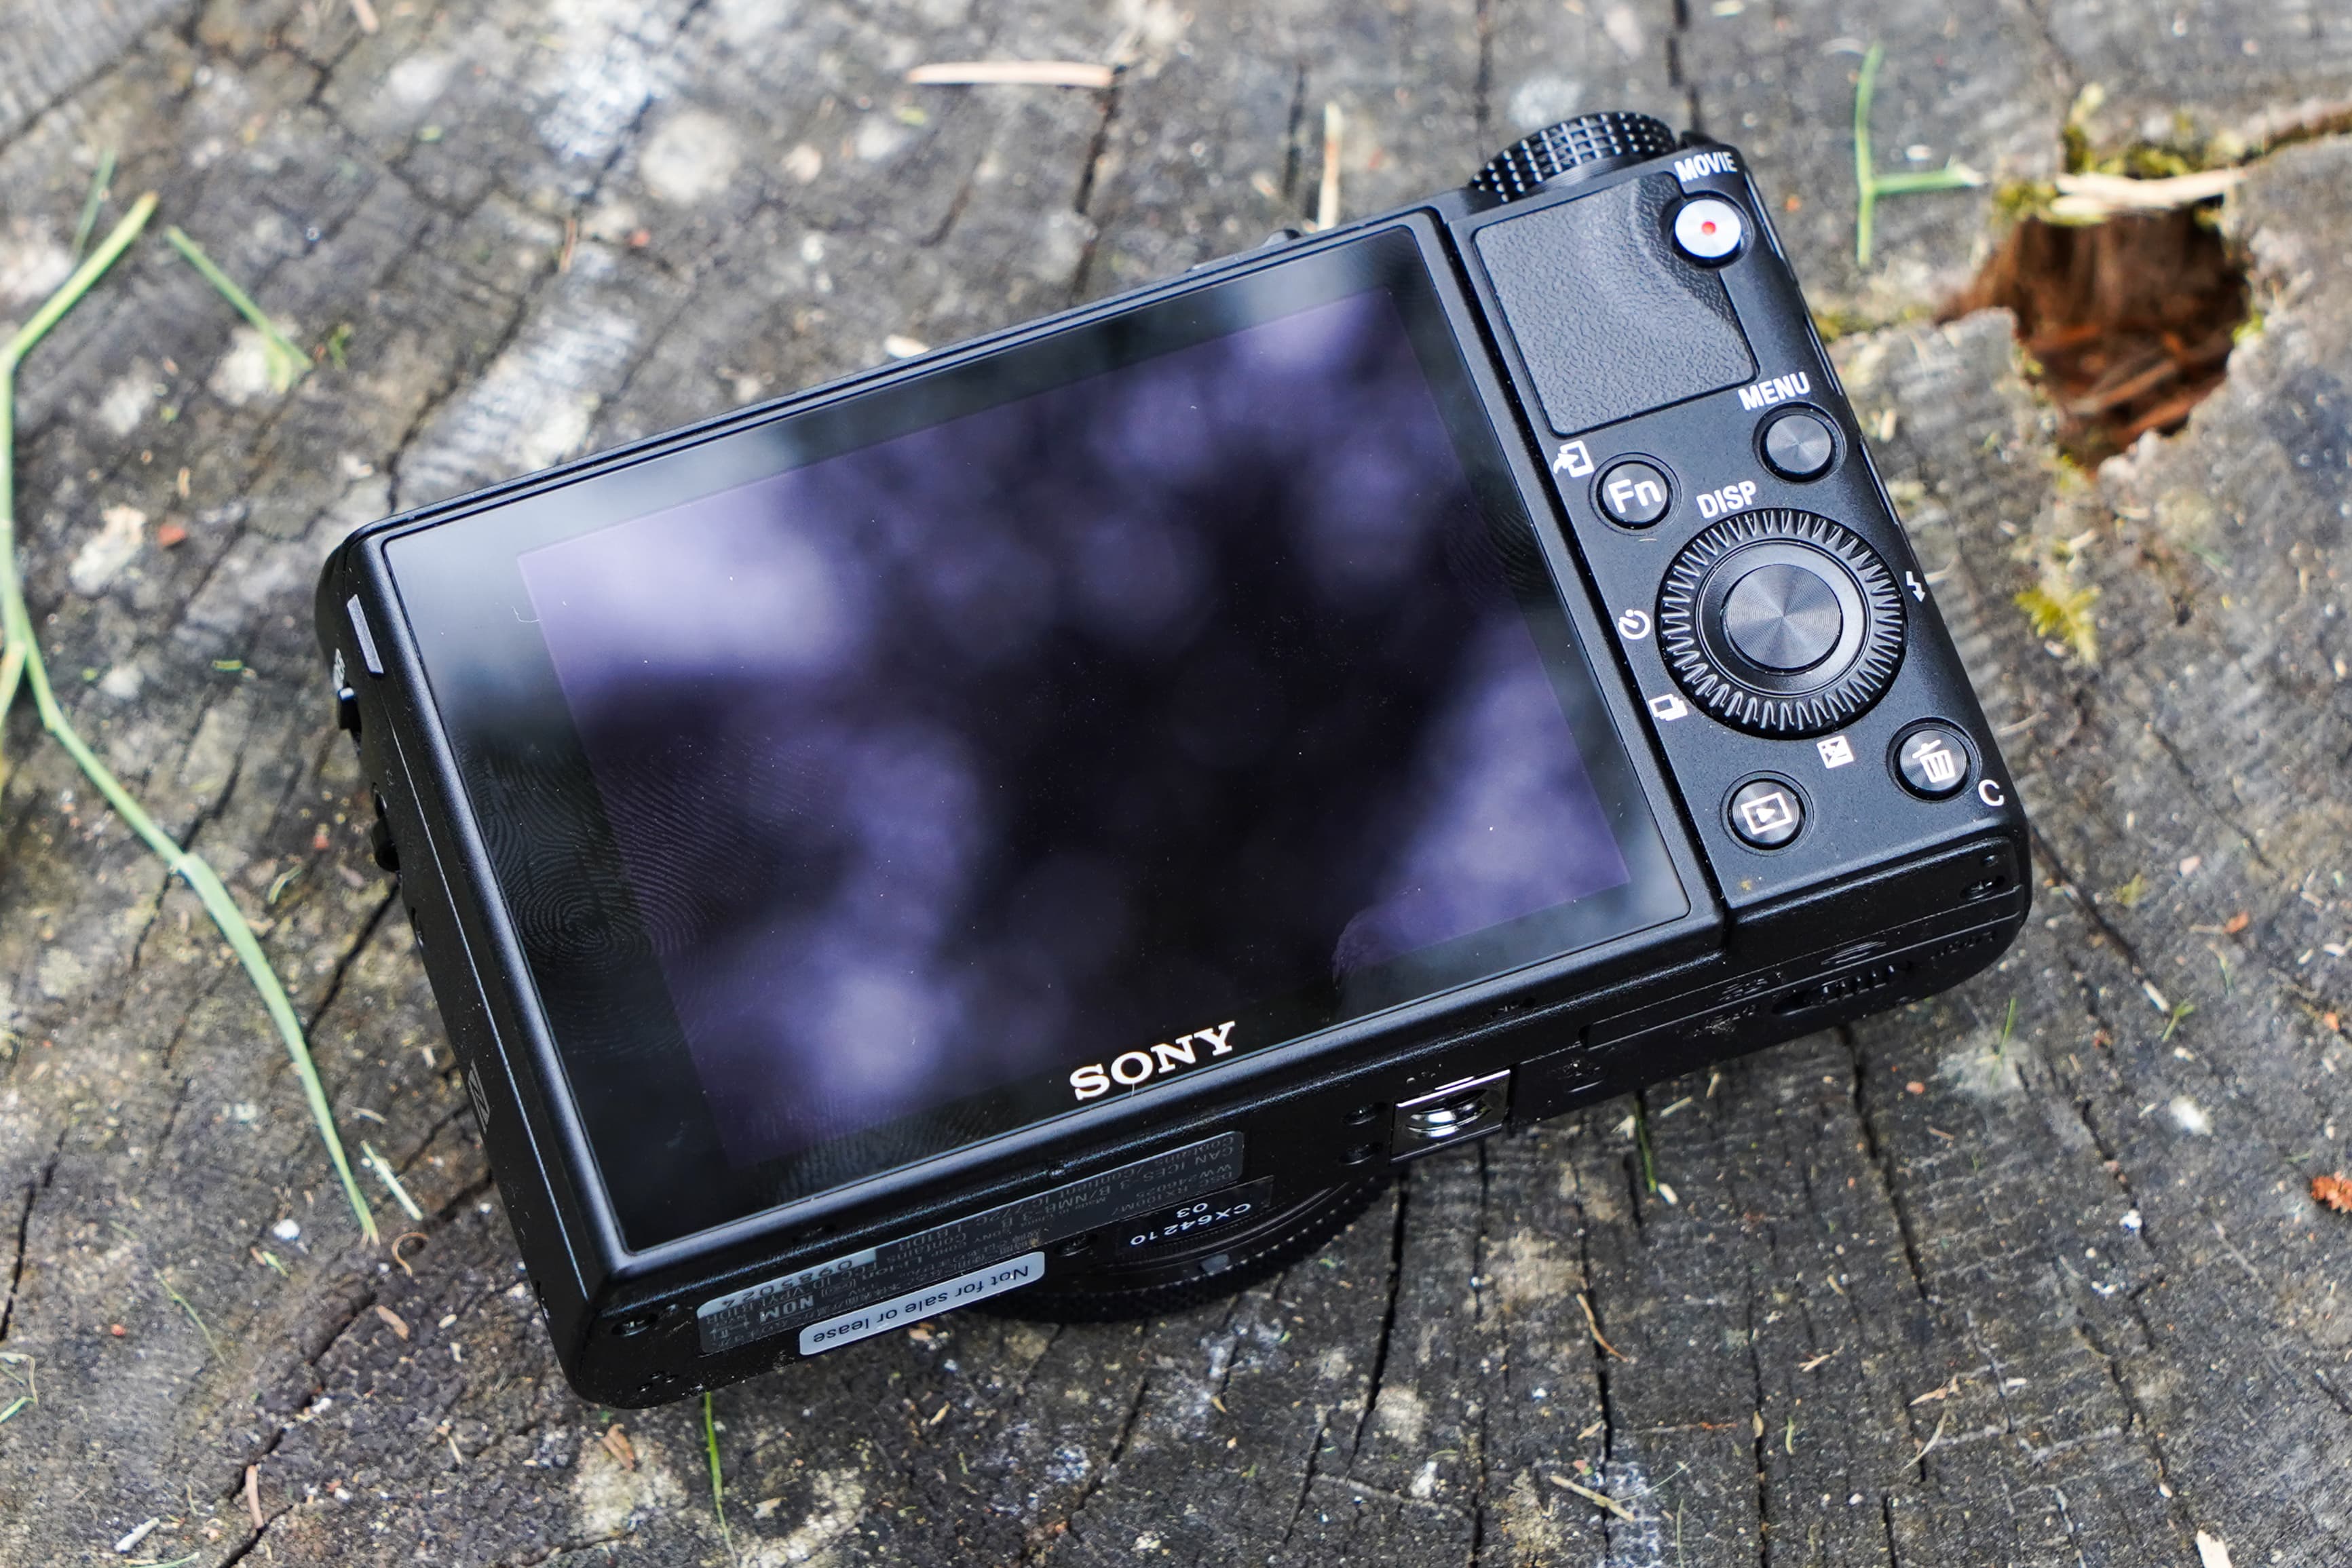 Sony RX100 VII Premium Compact Camera with 1.0-type stacked CMOS sensor  (DSCRX100M7)